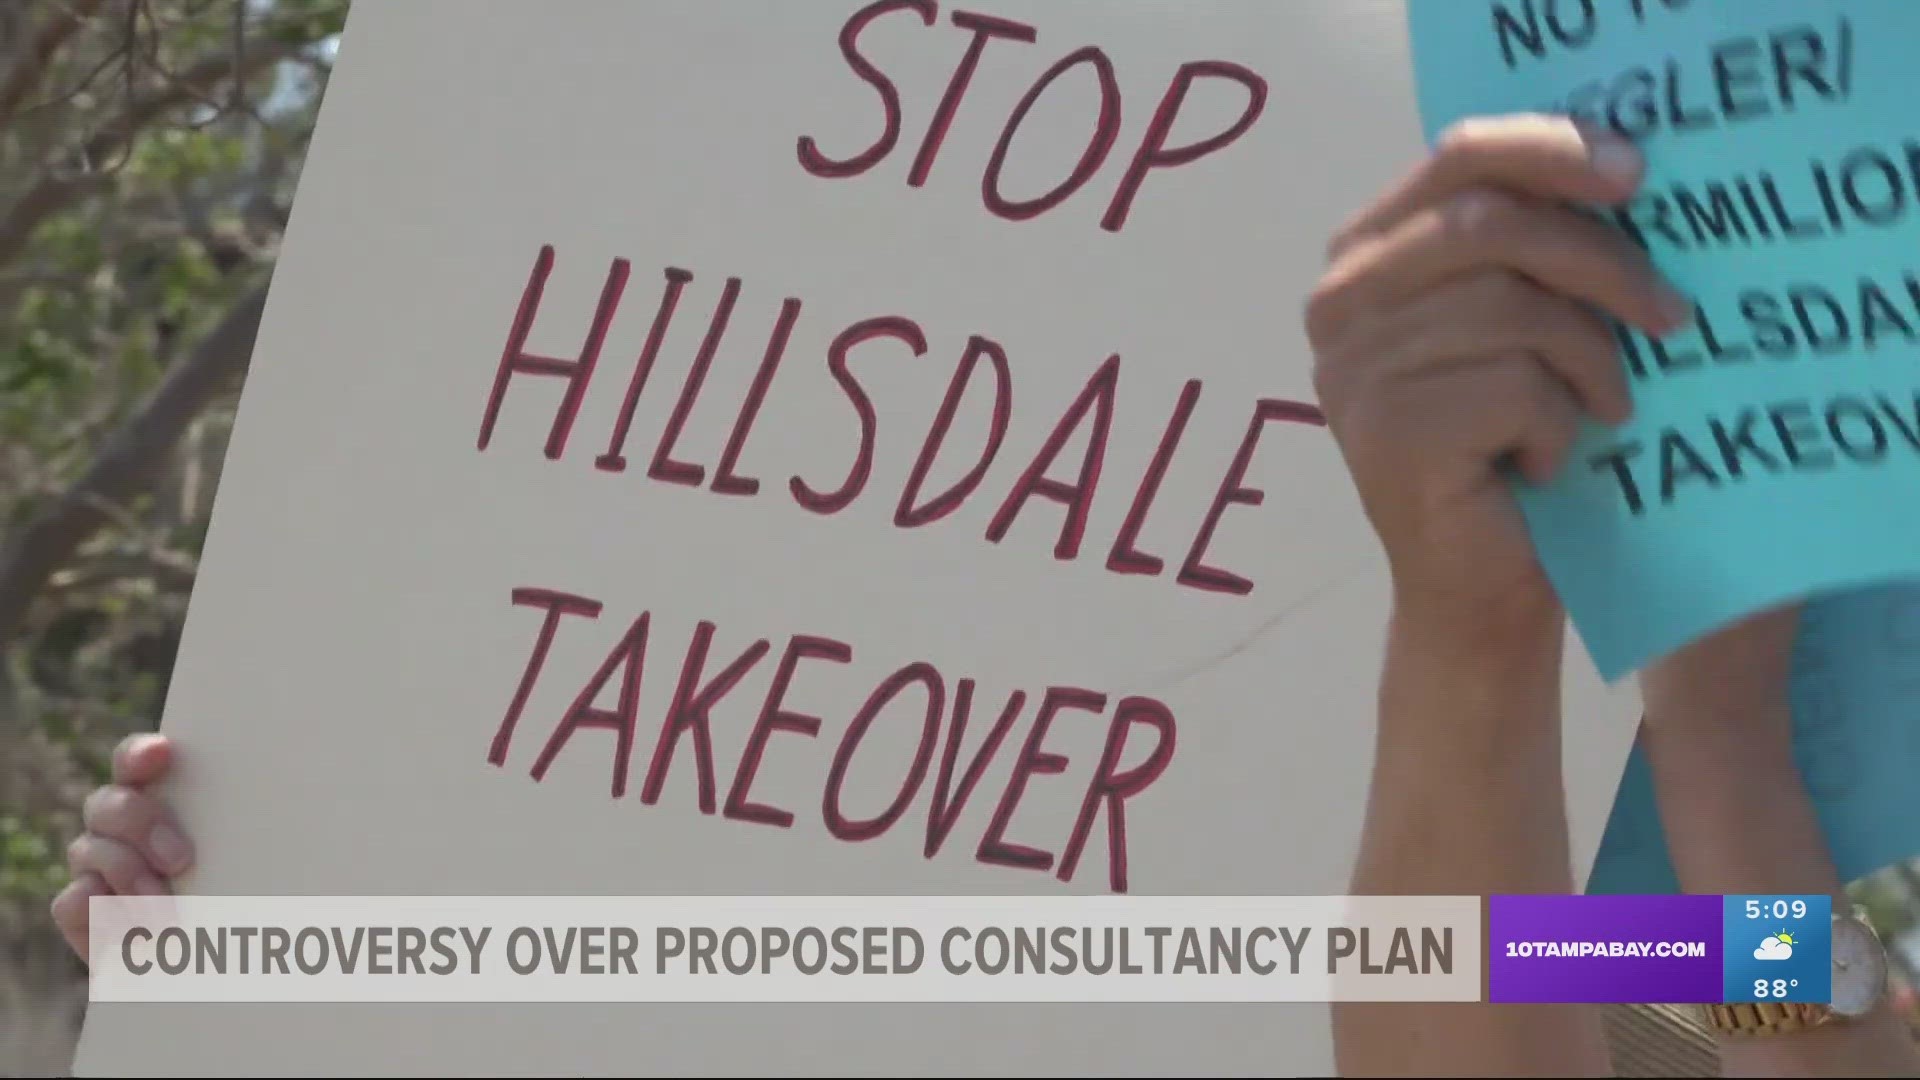 Several members of the public spoke out against the plan.